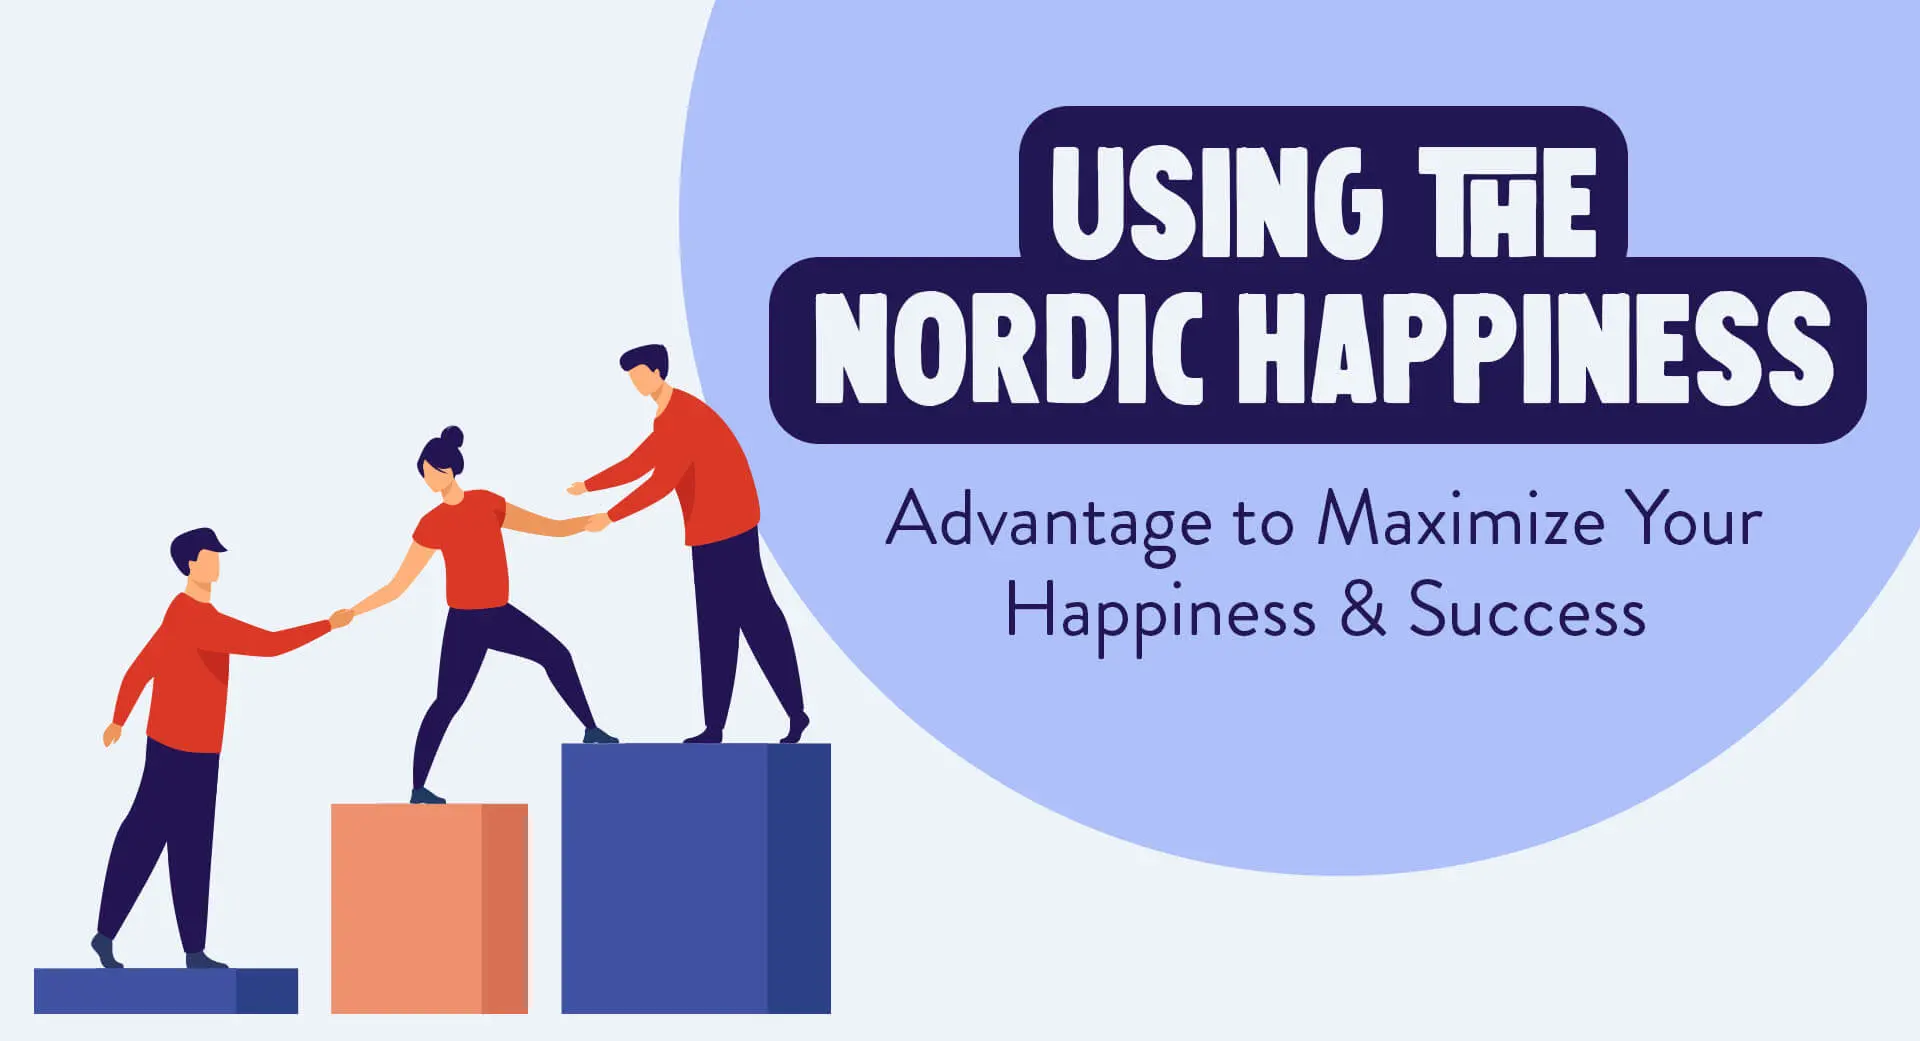 Using the Nordic Happiness Advantage to Maximize Your Happiness & Success